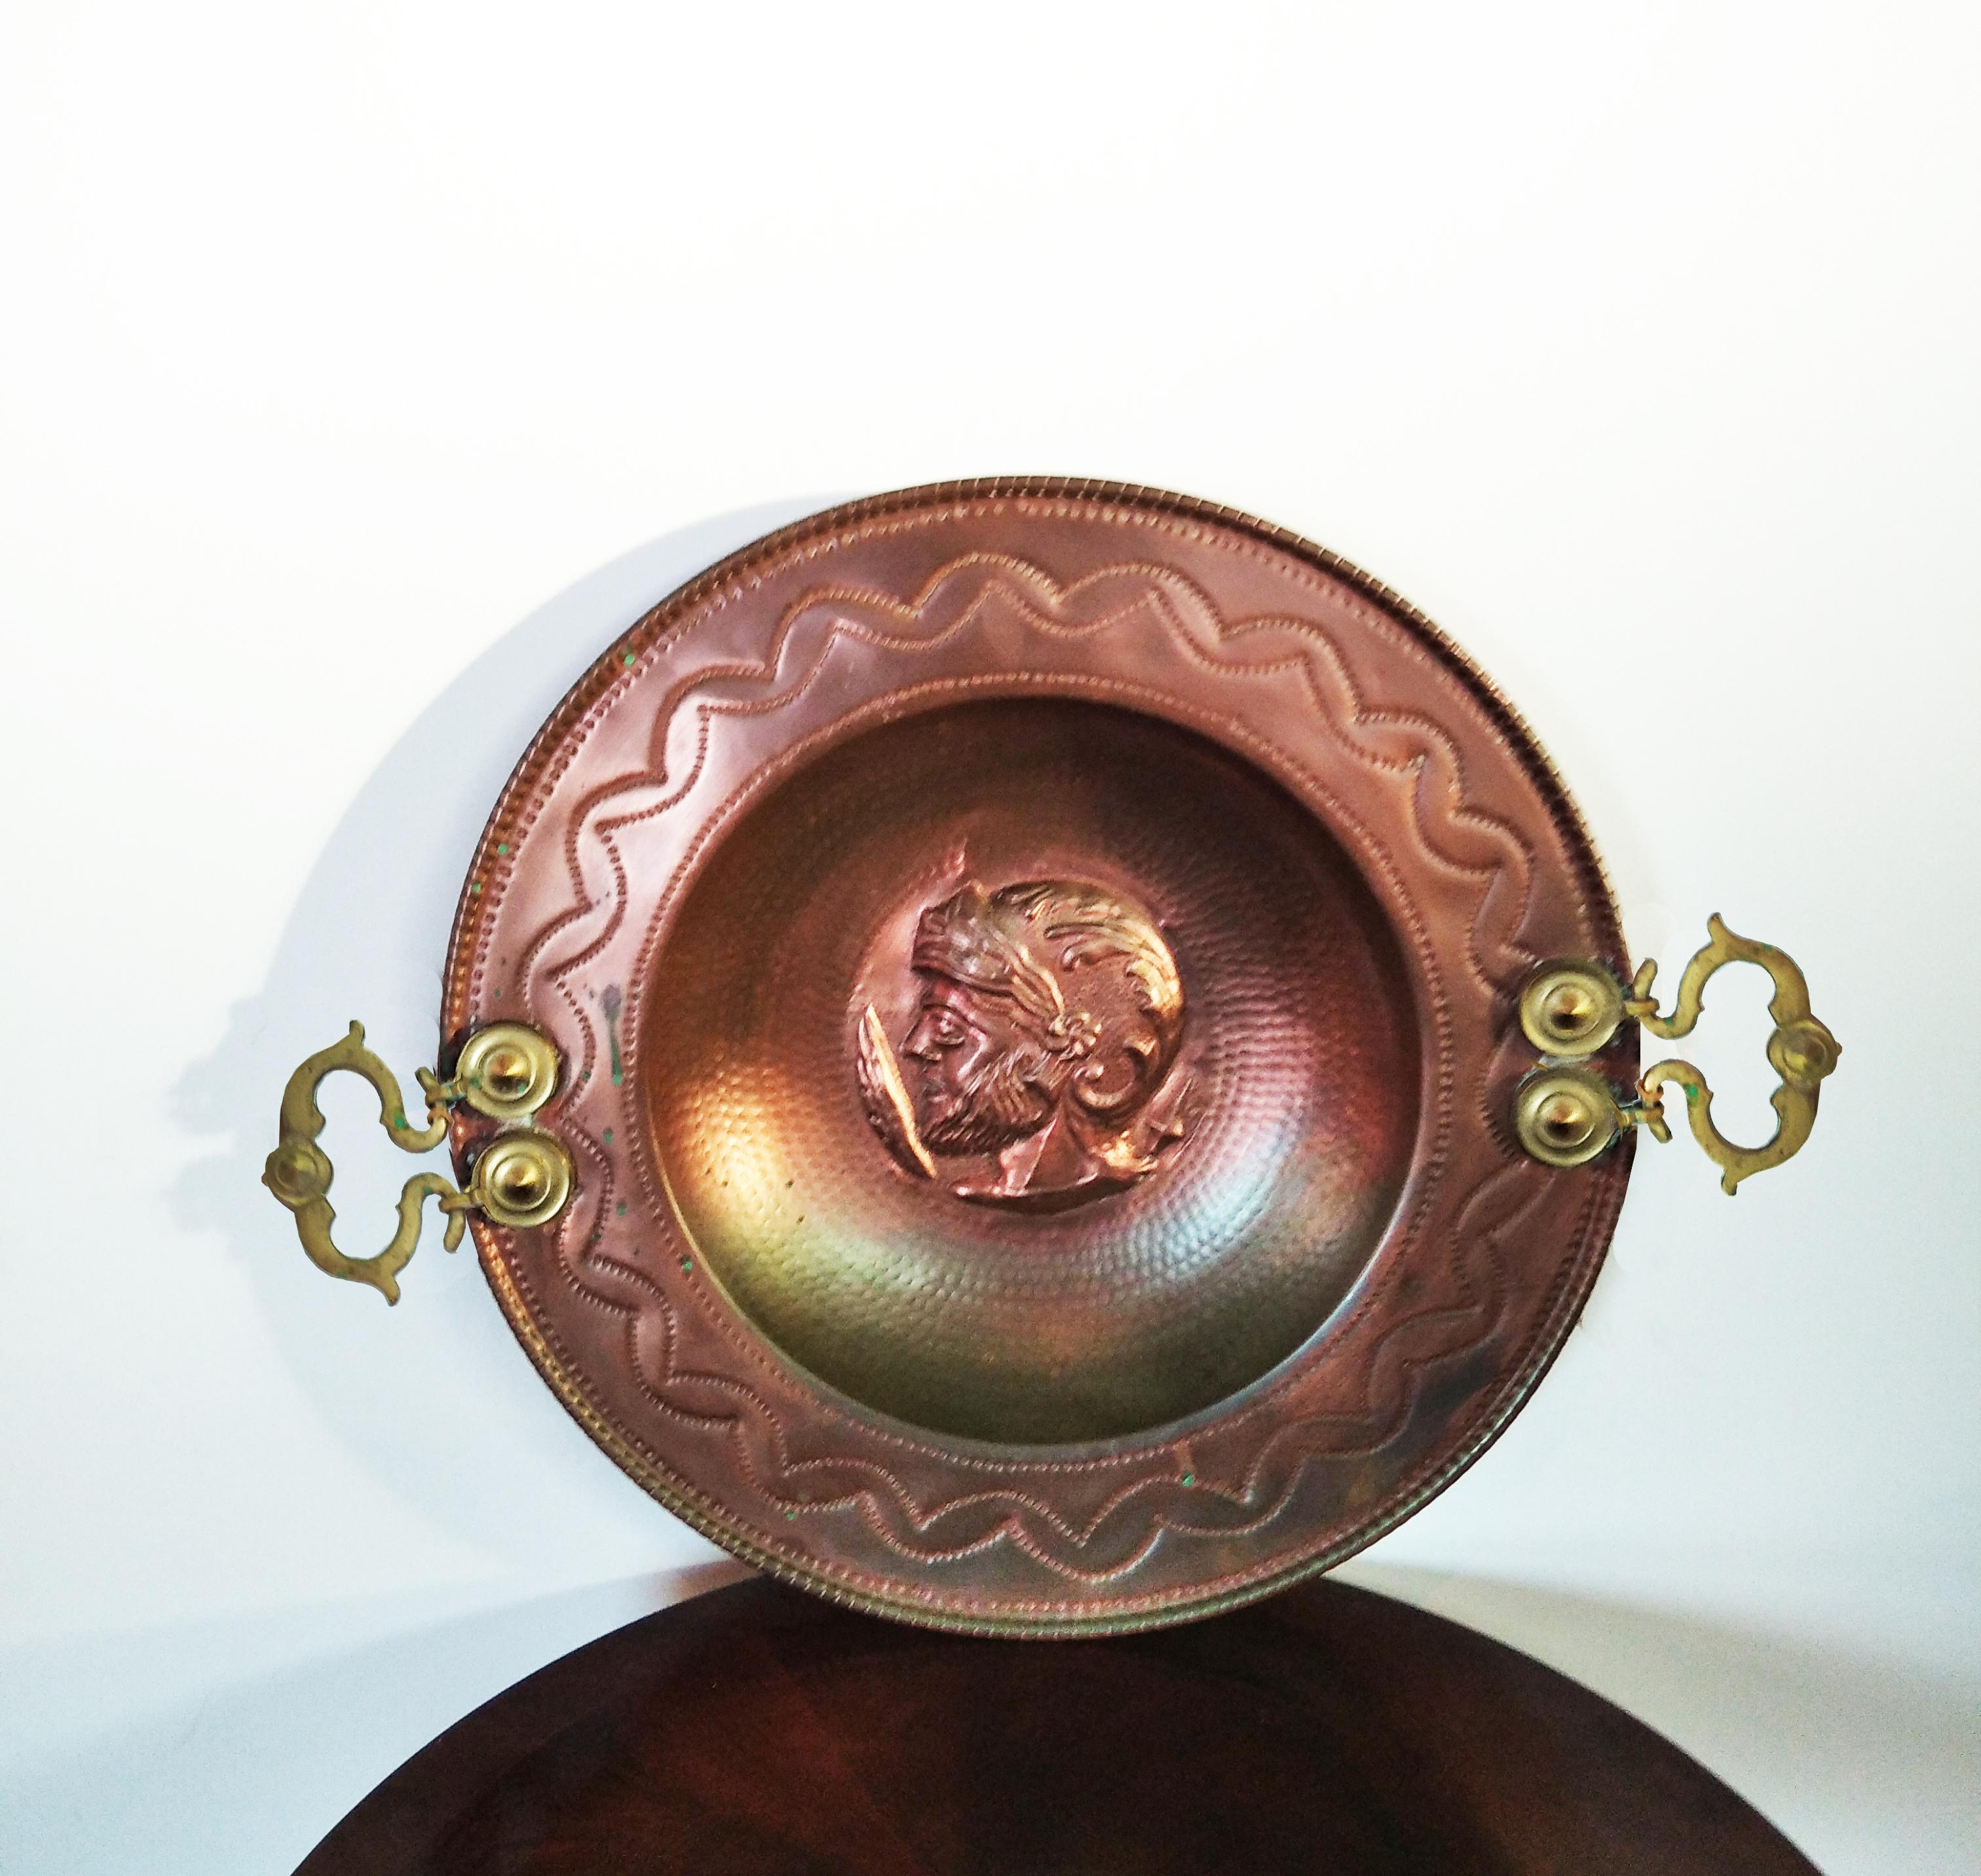 Spanish remorse or renaissance revival style copper plate or brazier
Large plate with carved Roman head and handles in bronze. Ideal for hanging
Spanish remorse style corresponds to the period of the late nineteenth century and early twentieth